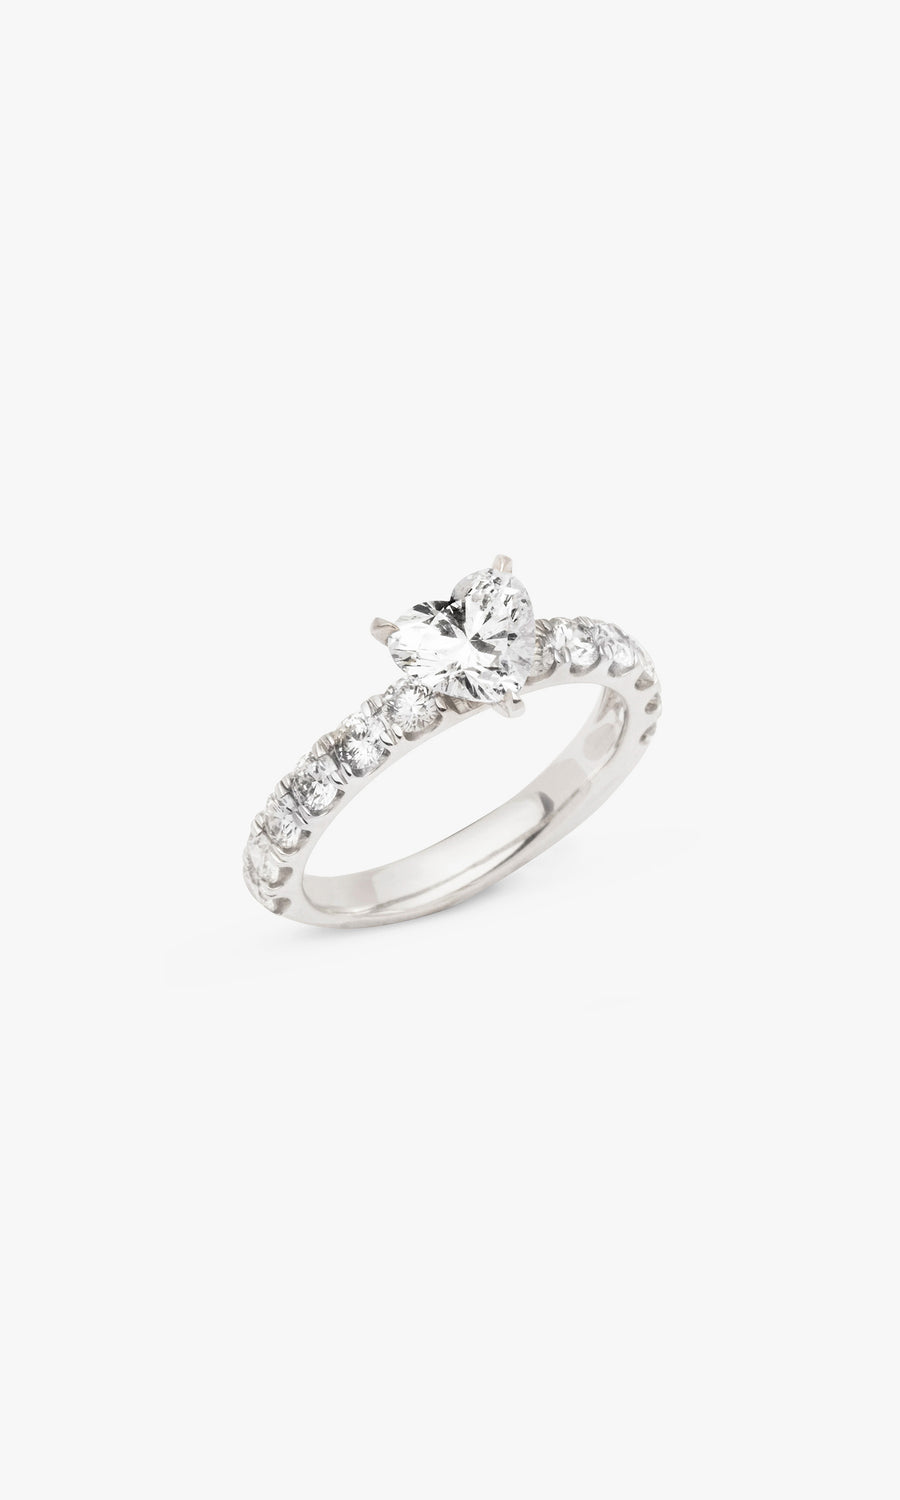 LE GRAND AMOUR HEART RING 1.04 Carat